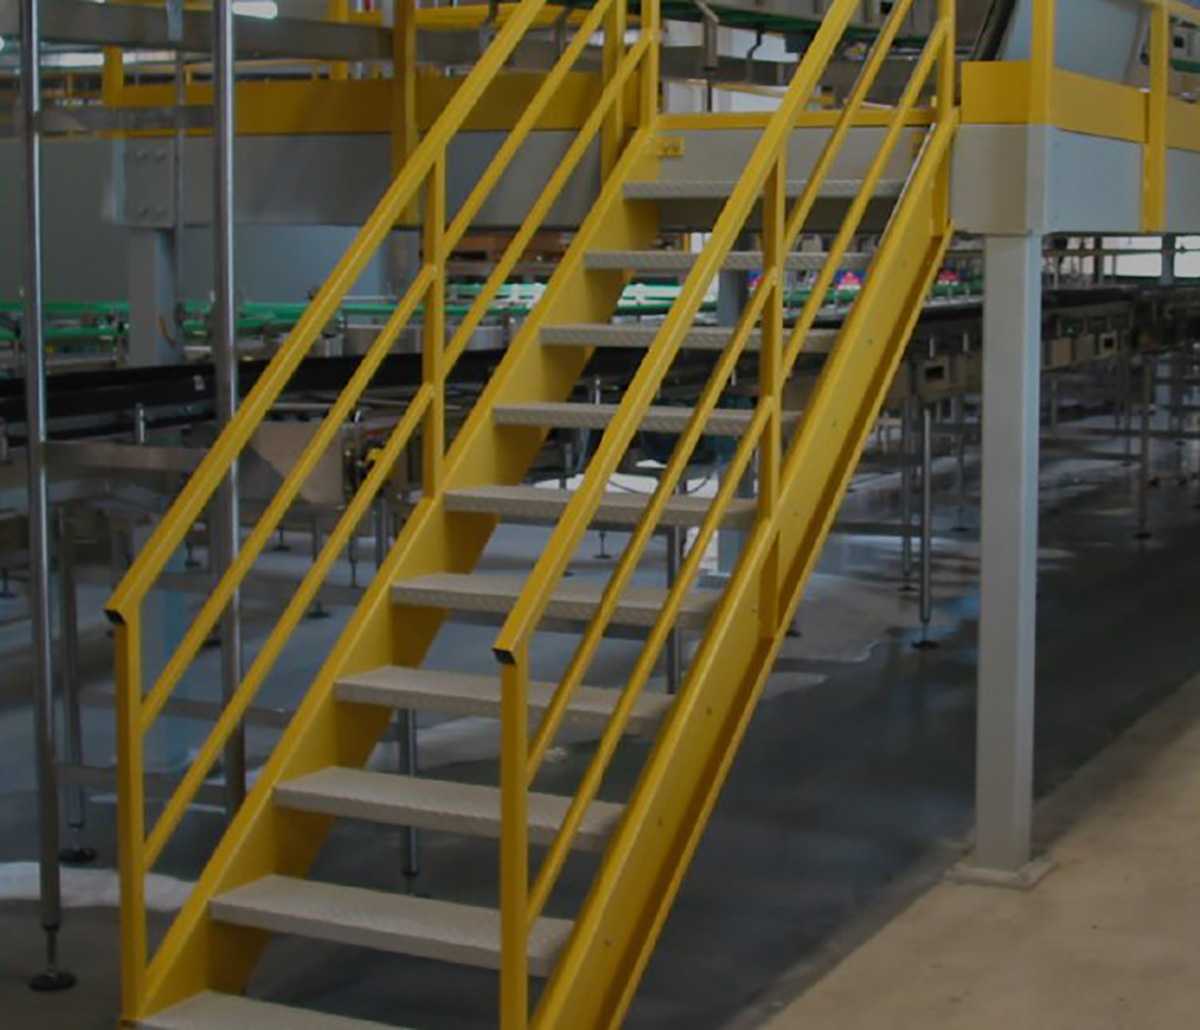 MiTek Industrial Stairs Engineered Systems Products - Industrial stairs in a warehouse facility